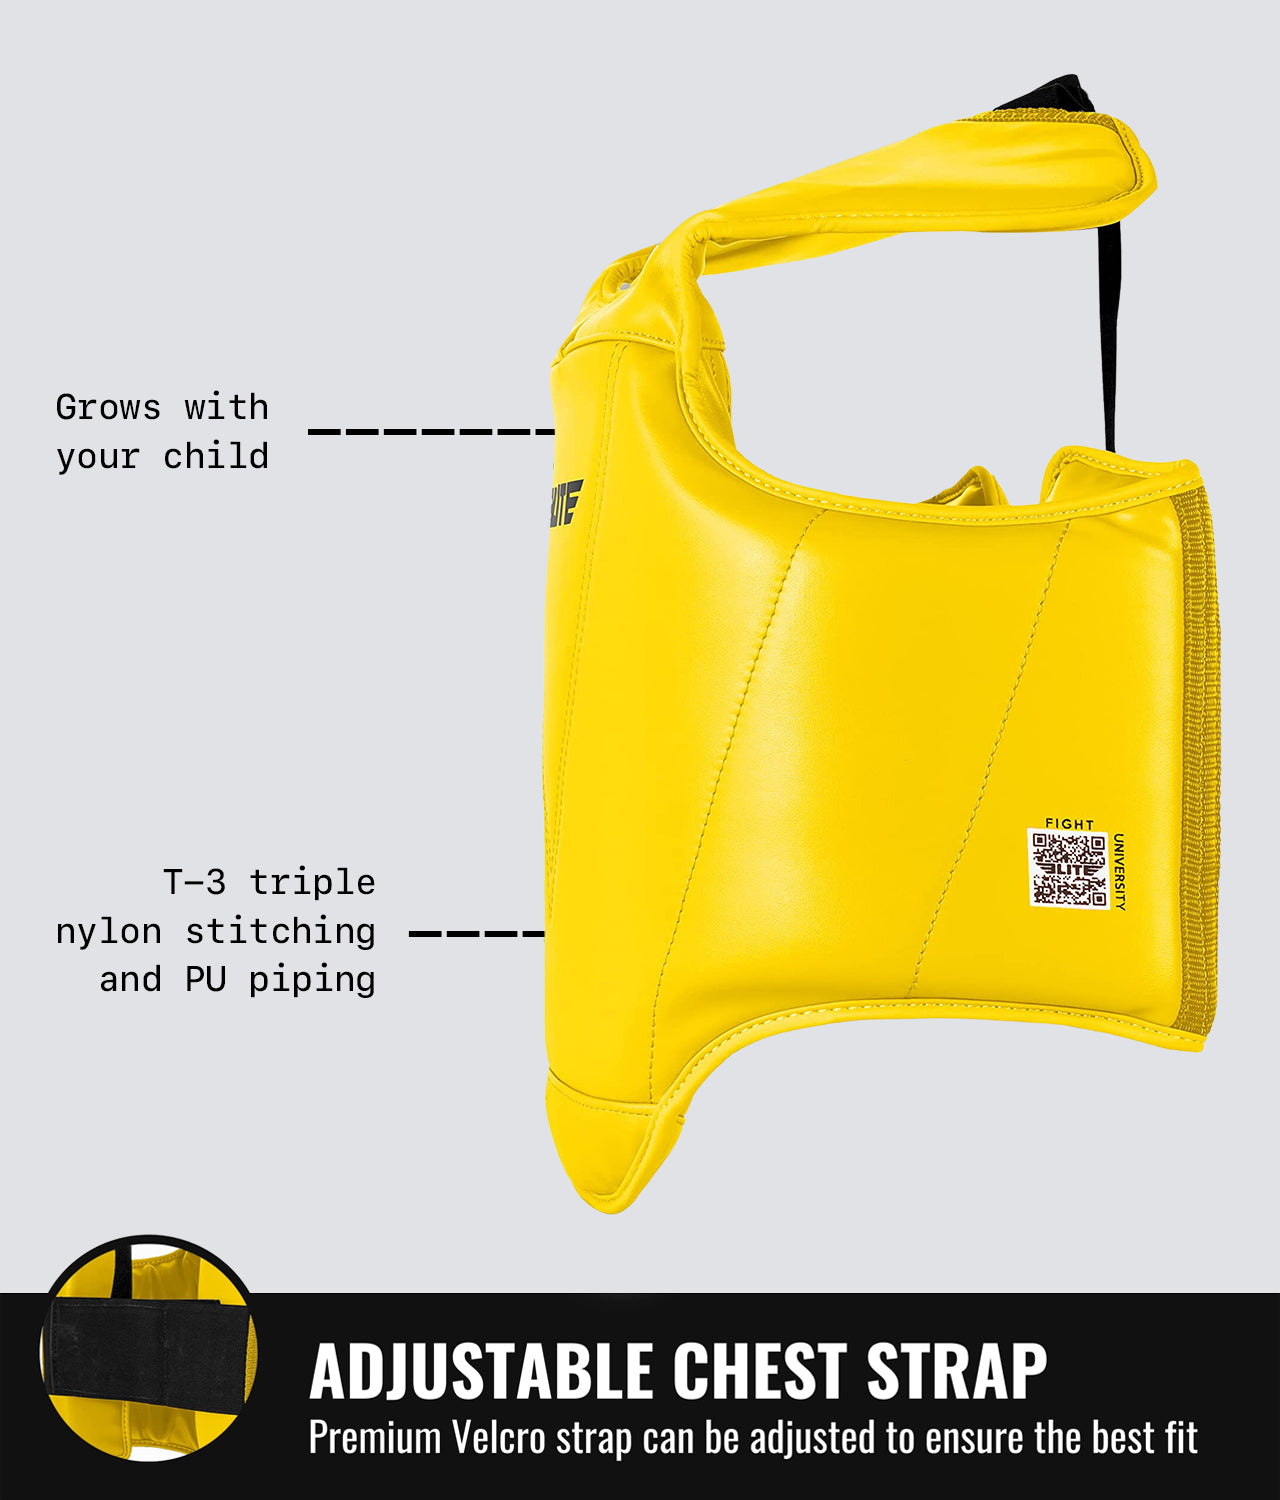 Elite Sports Kids' Yellow Boxing Chest Guard : 4 to 8 Years